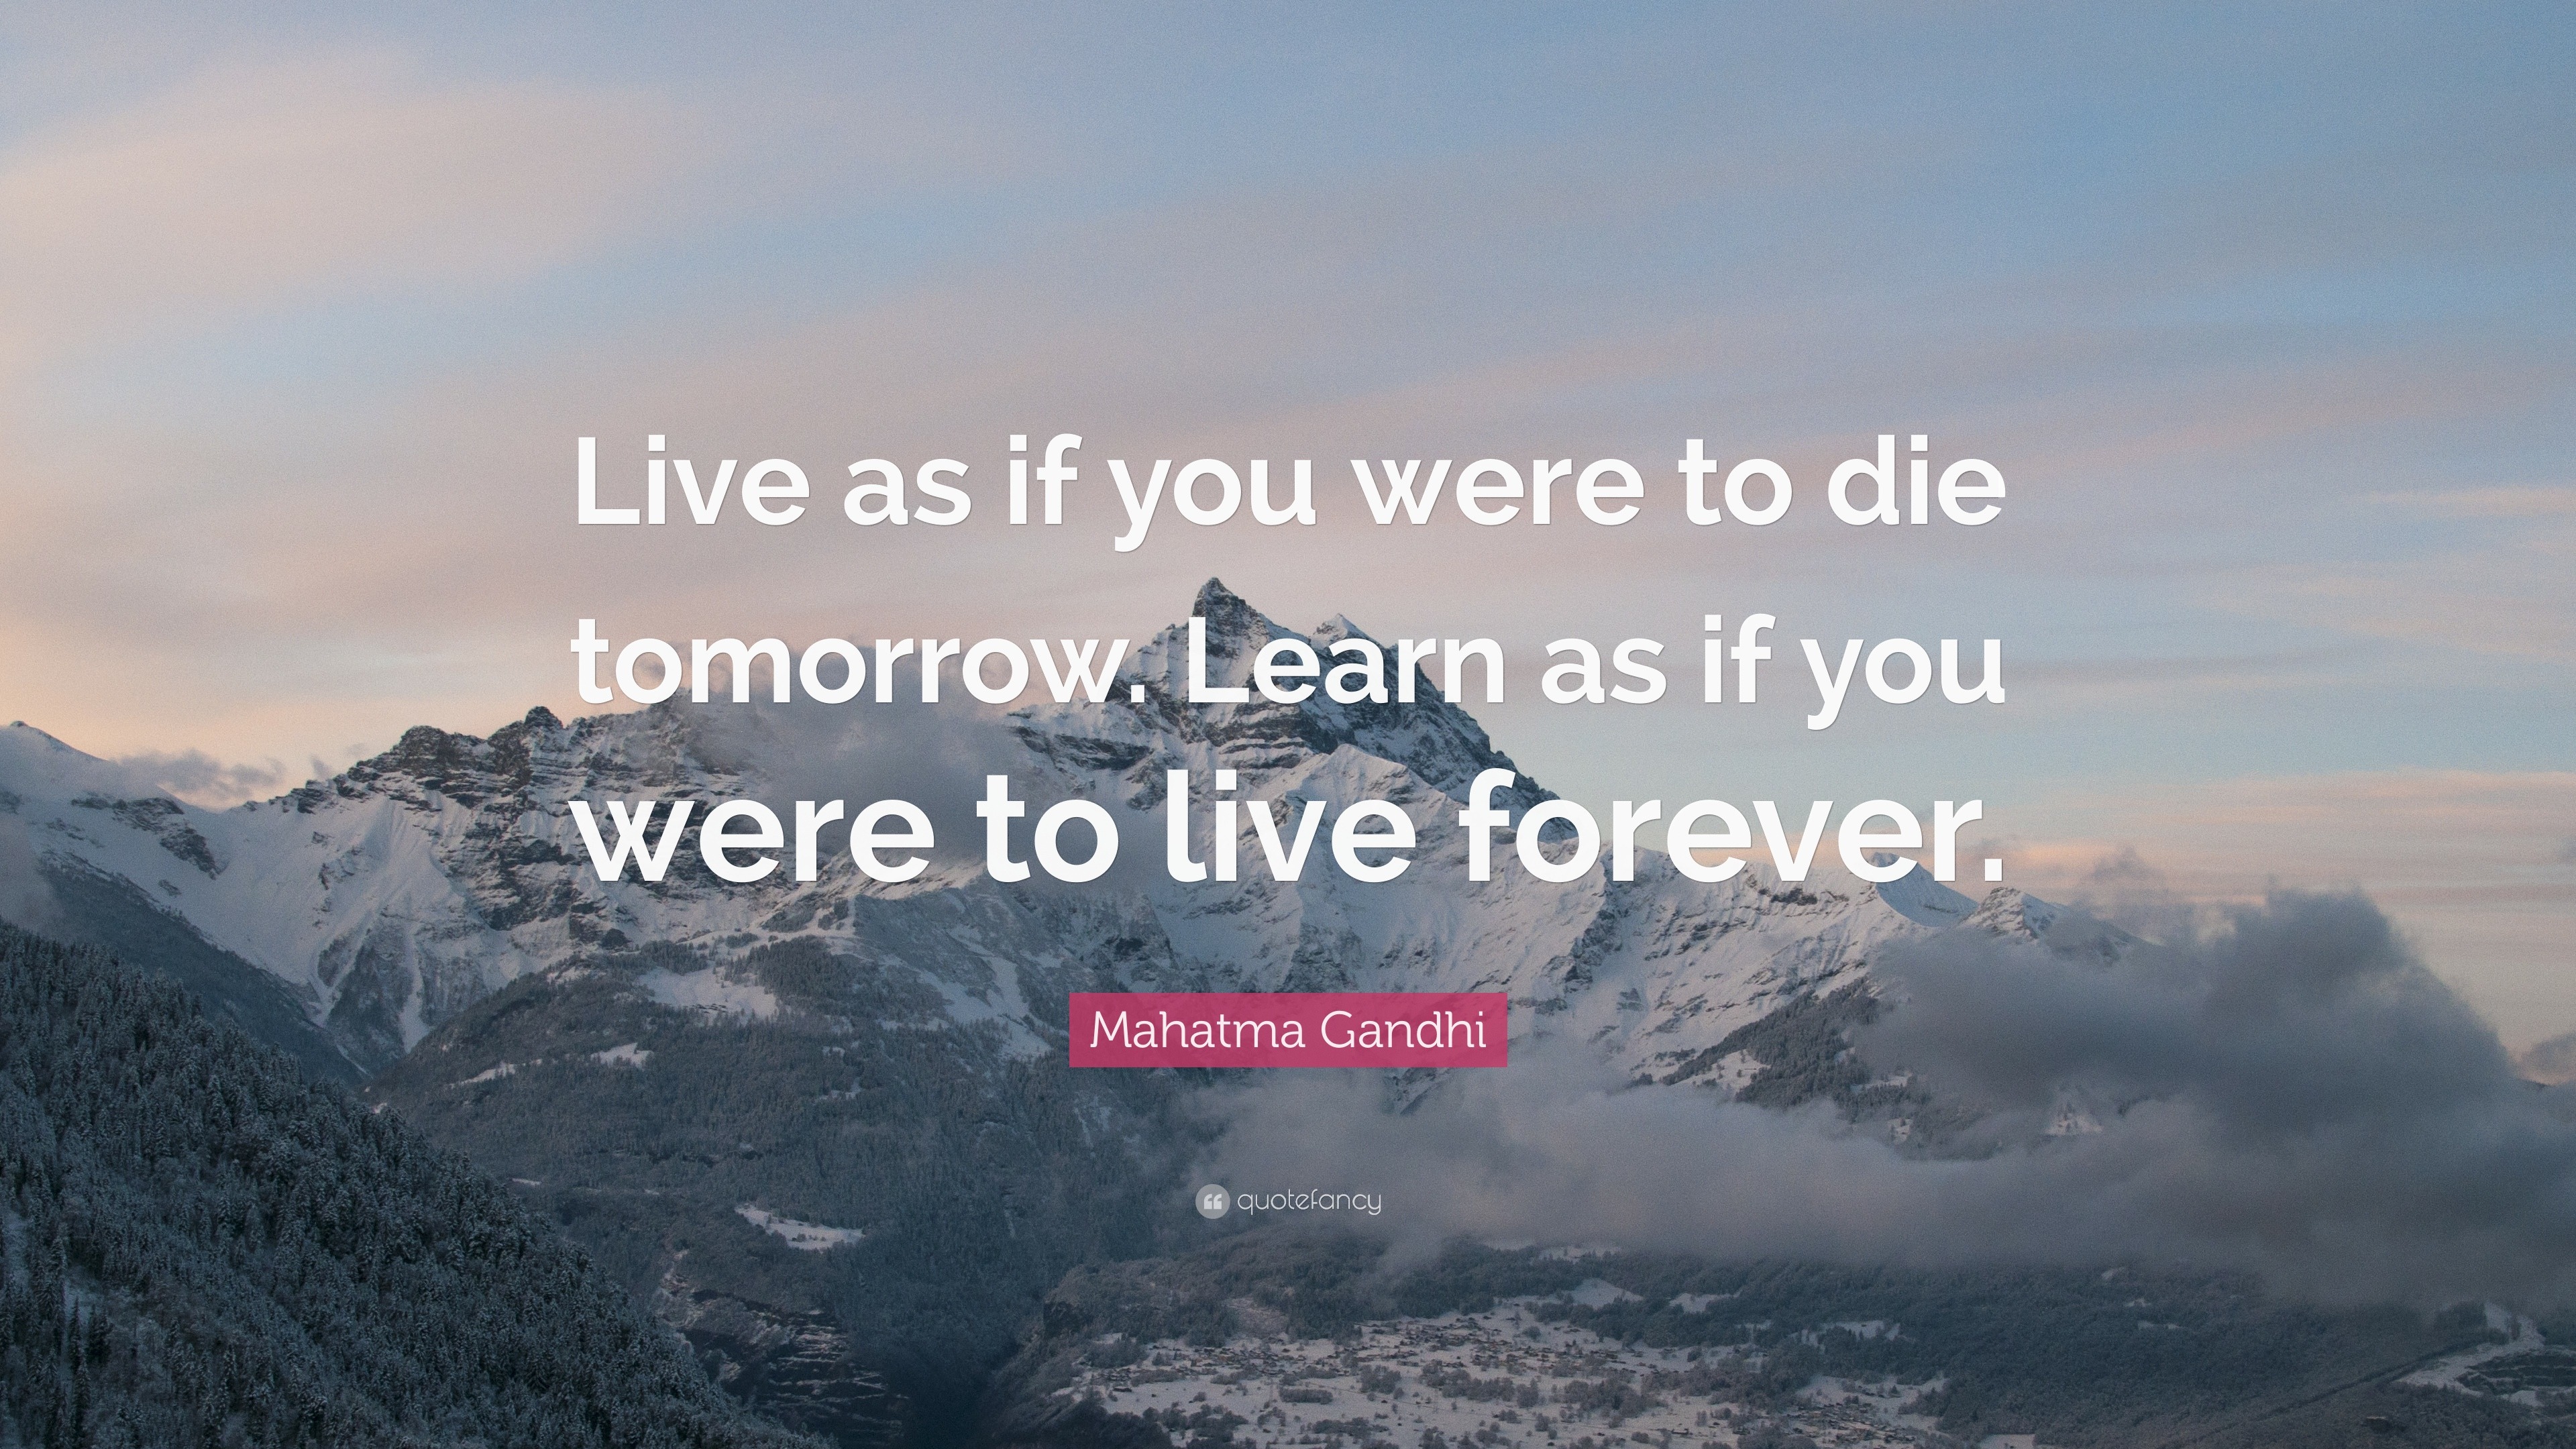 Mahatma Gandhi Quote Live As If You Were To Die Tomorrow Learn As If You Were